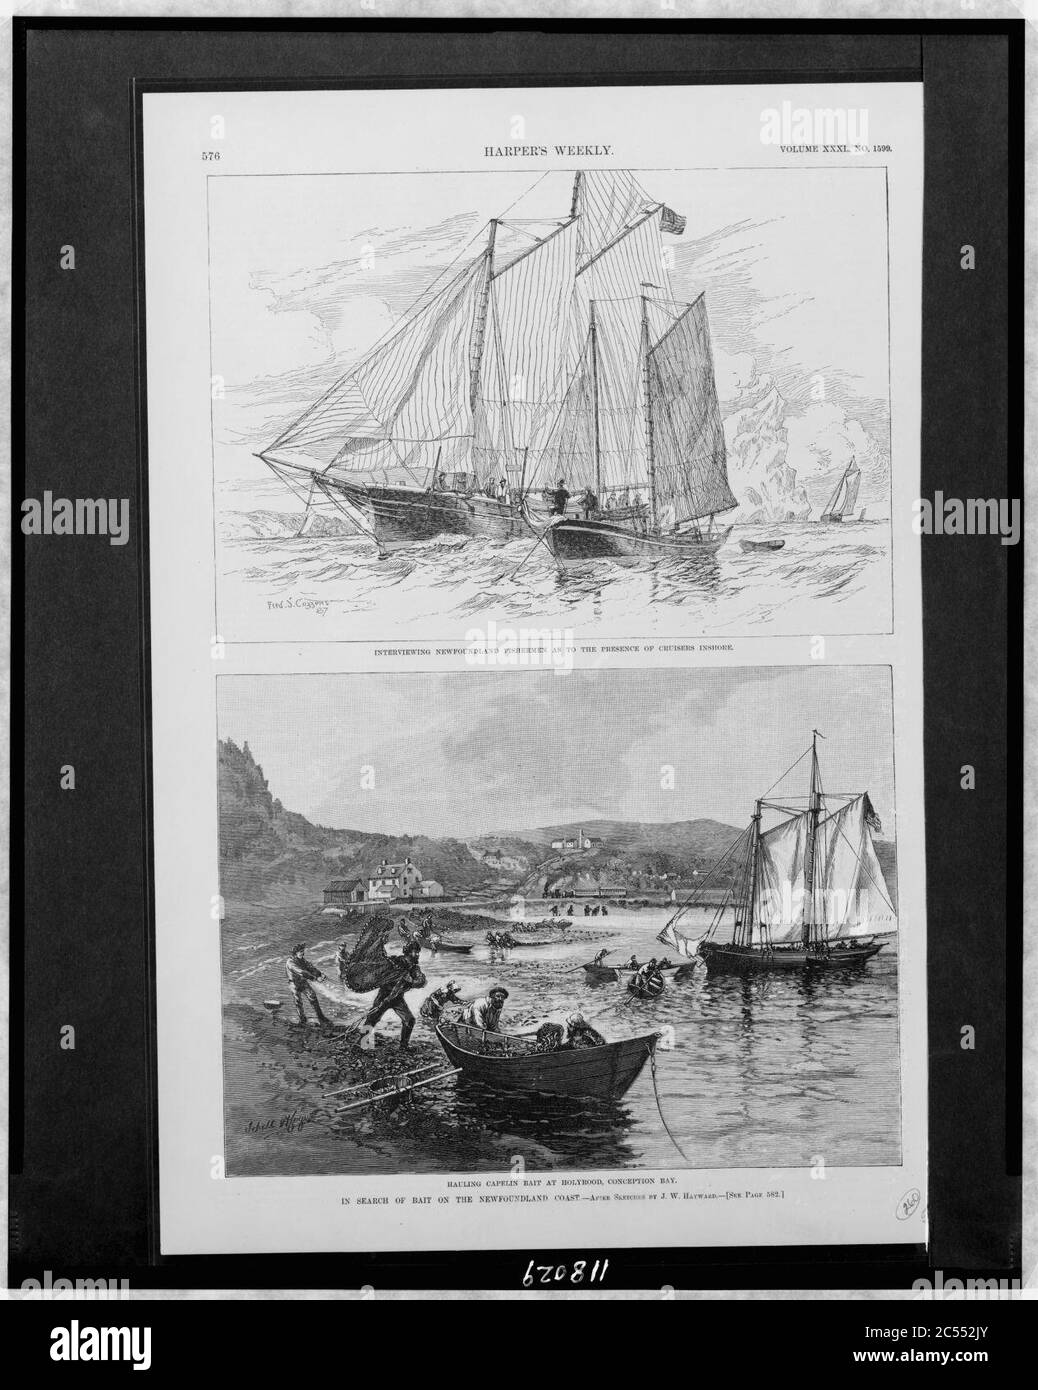 Interviewing Newfoundland fishermen as to the presence of cruisers inshore - Fred S. Cozzens. In search of bait on the Newfoundland coast-Hauling capelin bait at Holyrood, Conception Bay - Stock Photo